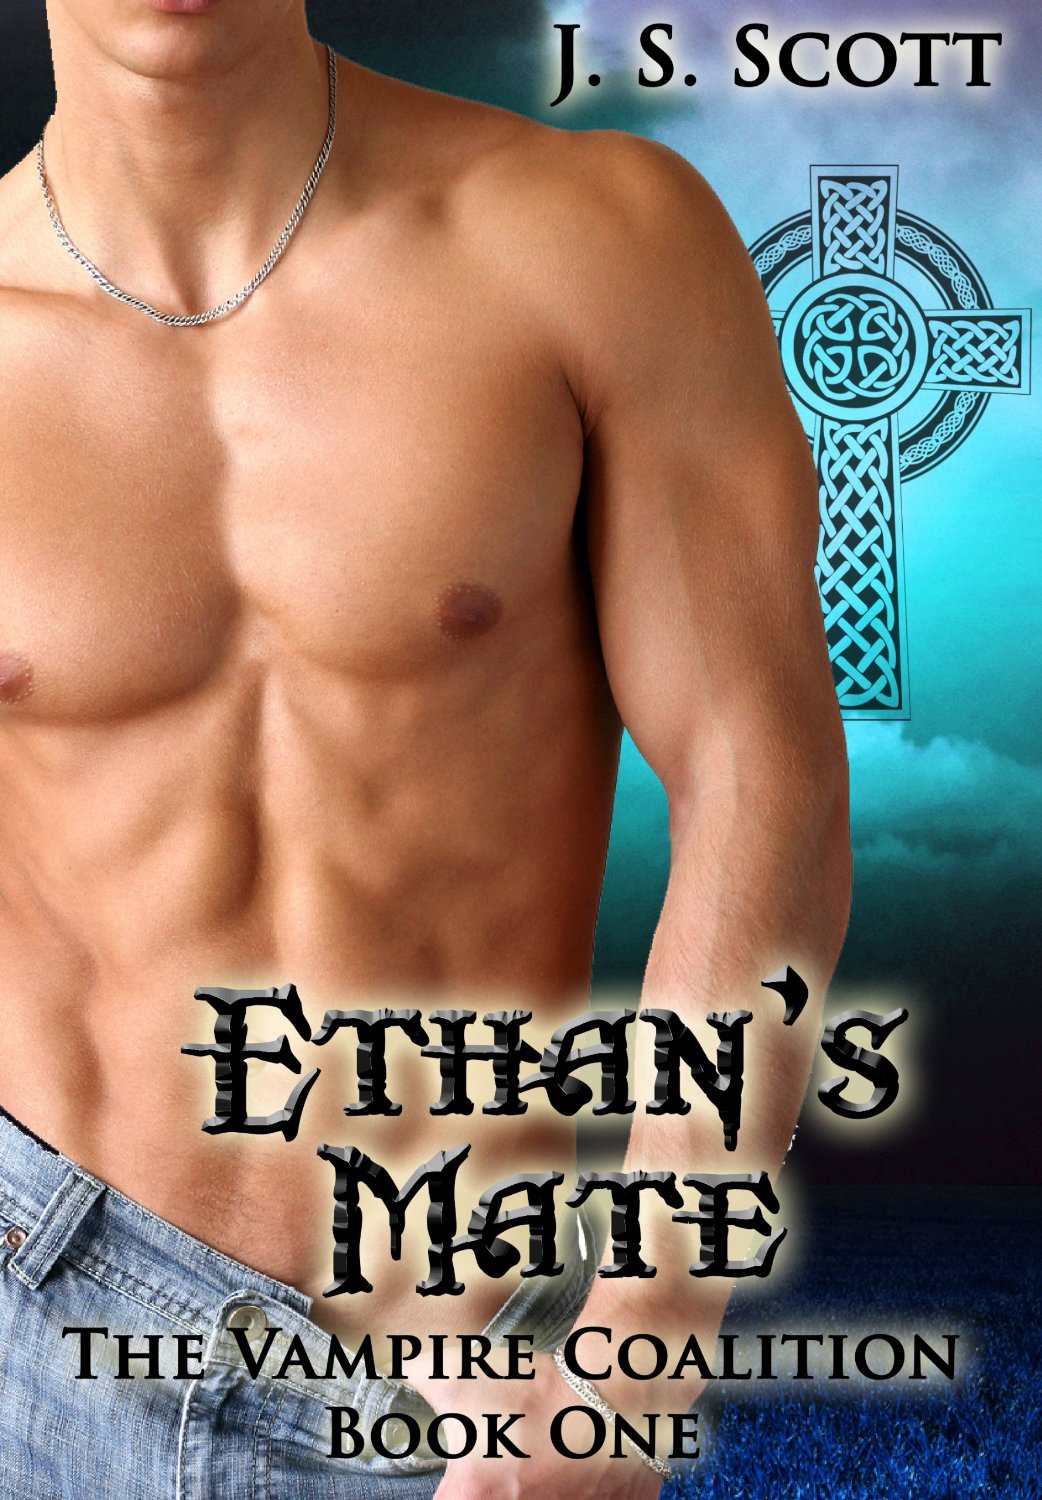 Ethan’s Mate by J.S. Scott